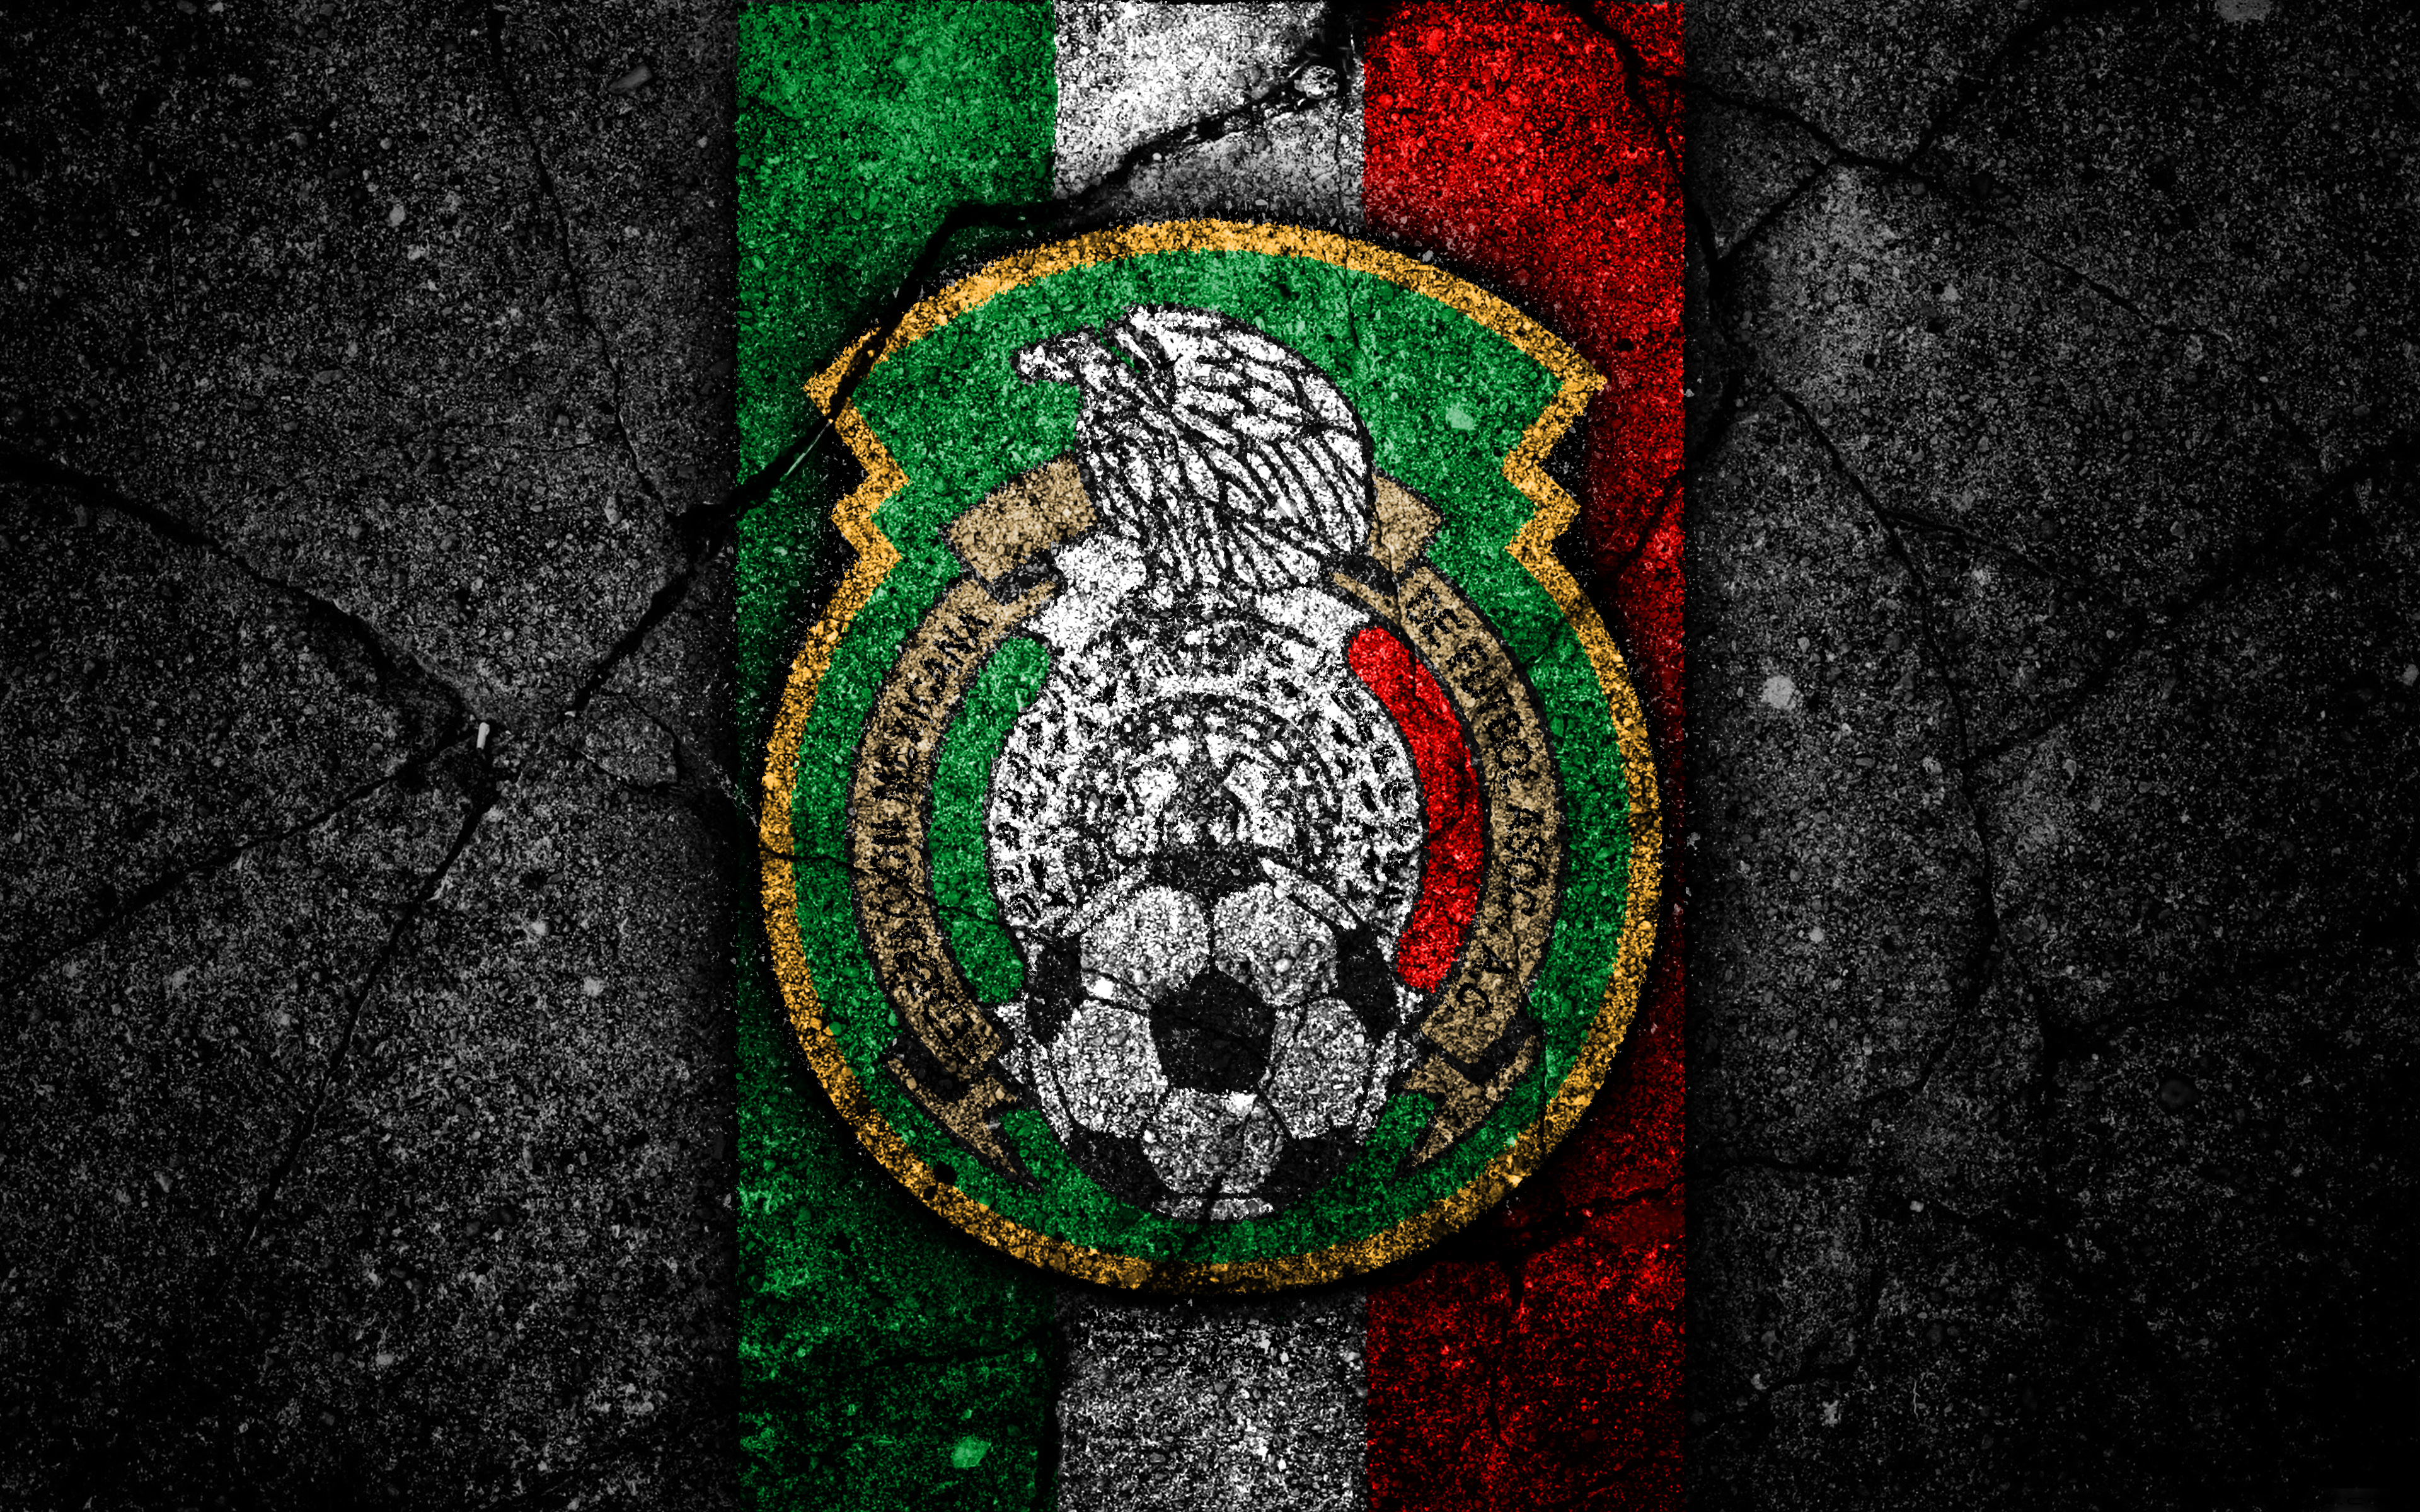 Mexican National Team on Twitter Only because you asked for it  Here  is our official wallpaper  Send us a screenshot of your lock screen  looking better than ever  NadaNosDetiene  